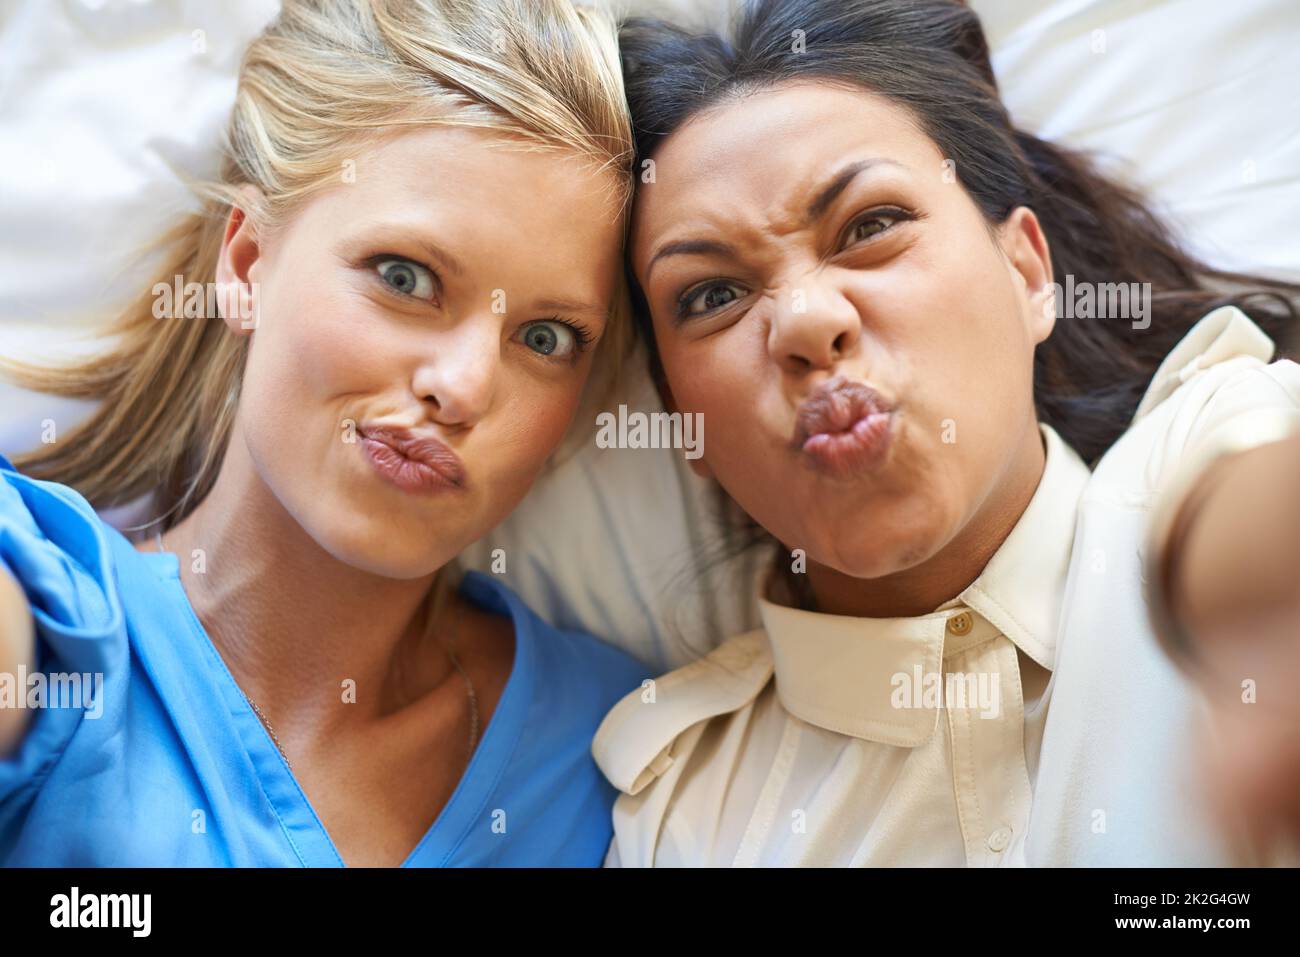 Make a face. High angle portrait of two attractive young women taking selfies while lying on a bed. Stock Photo